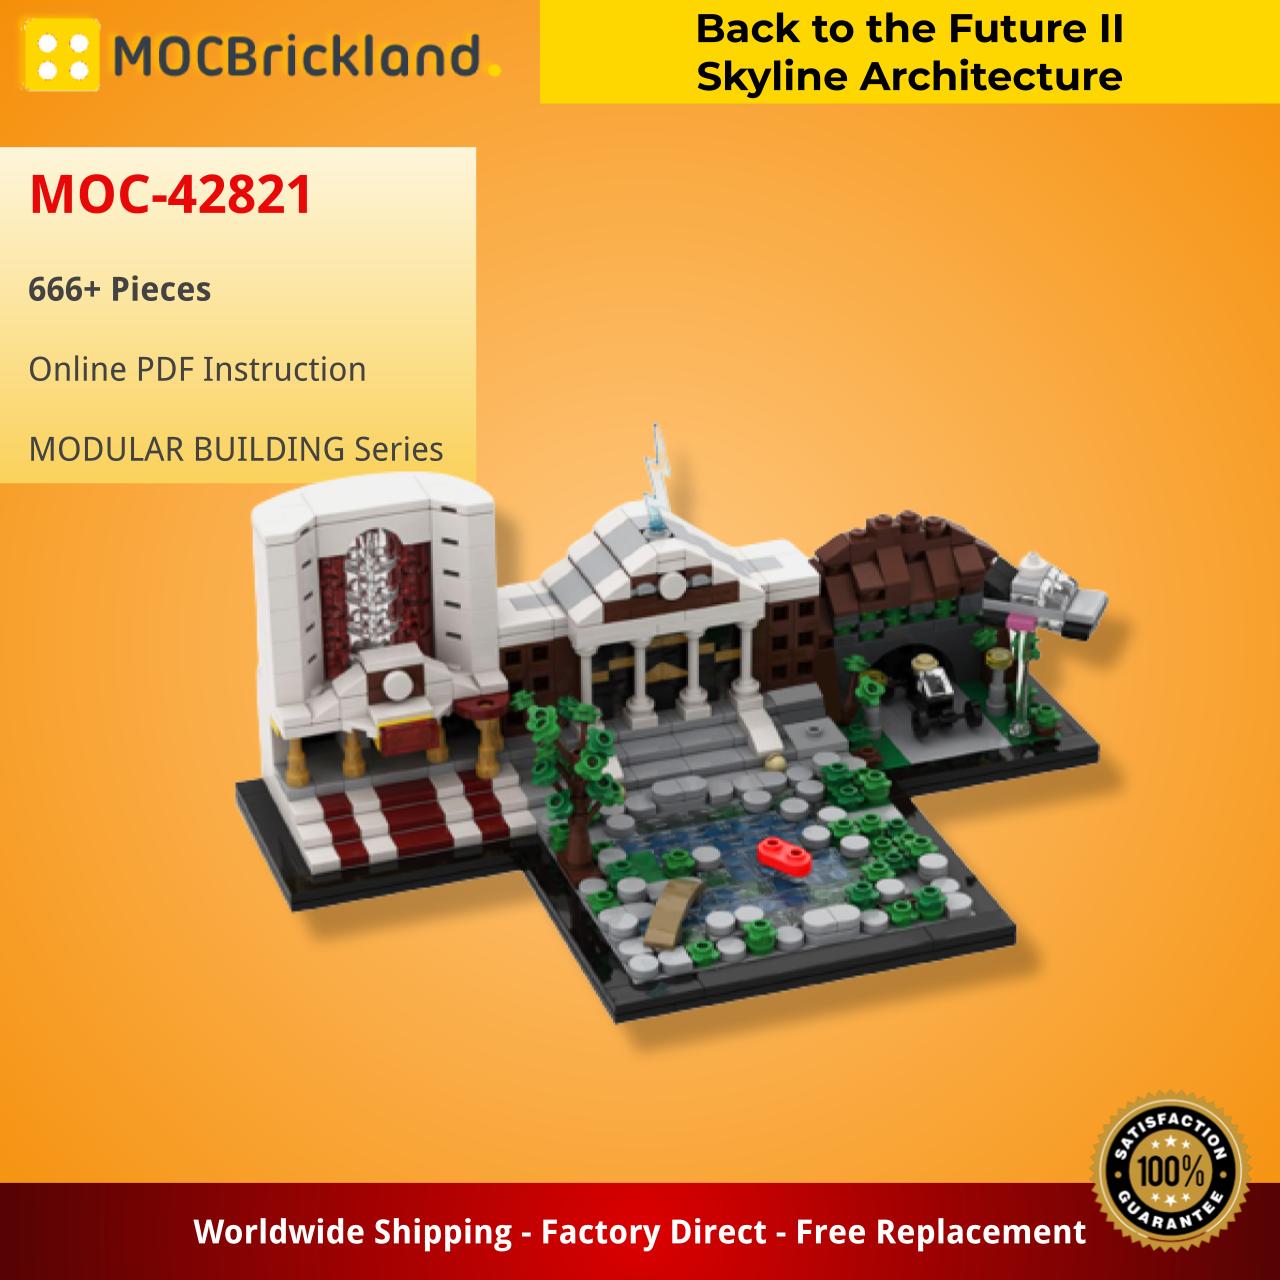 MOCBRICKLAND MOC-42821 Back to the Future II Skyline Architecture